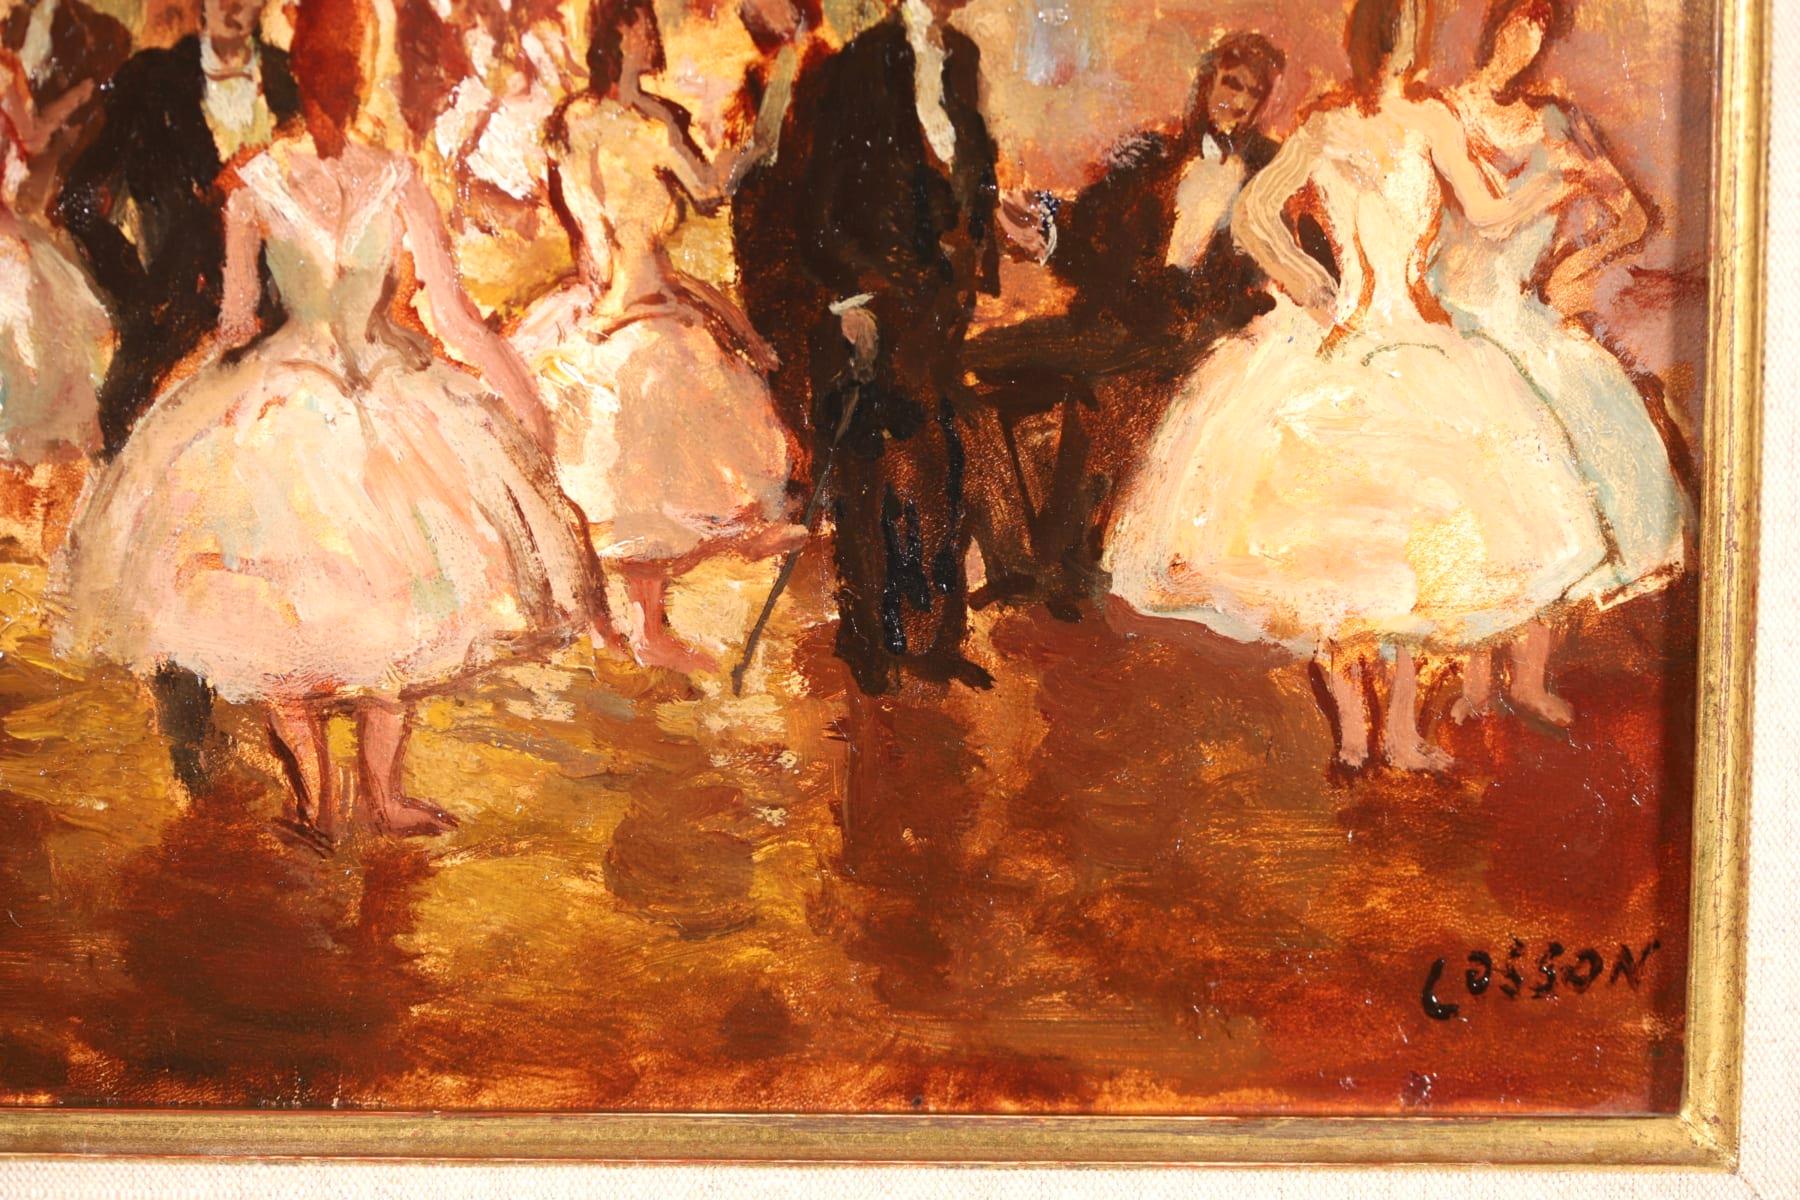 At the Ball - Post Impressionist Oil, Dancers in Interior by Marcel Cosson - Post-Impressionist Painting by Jean-Louis-Marcel Cosson